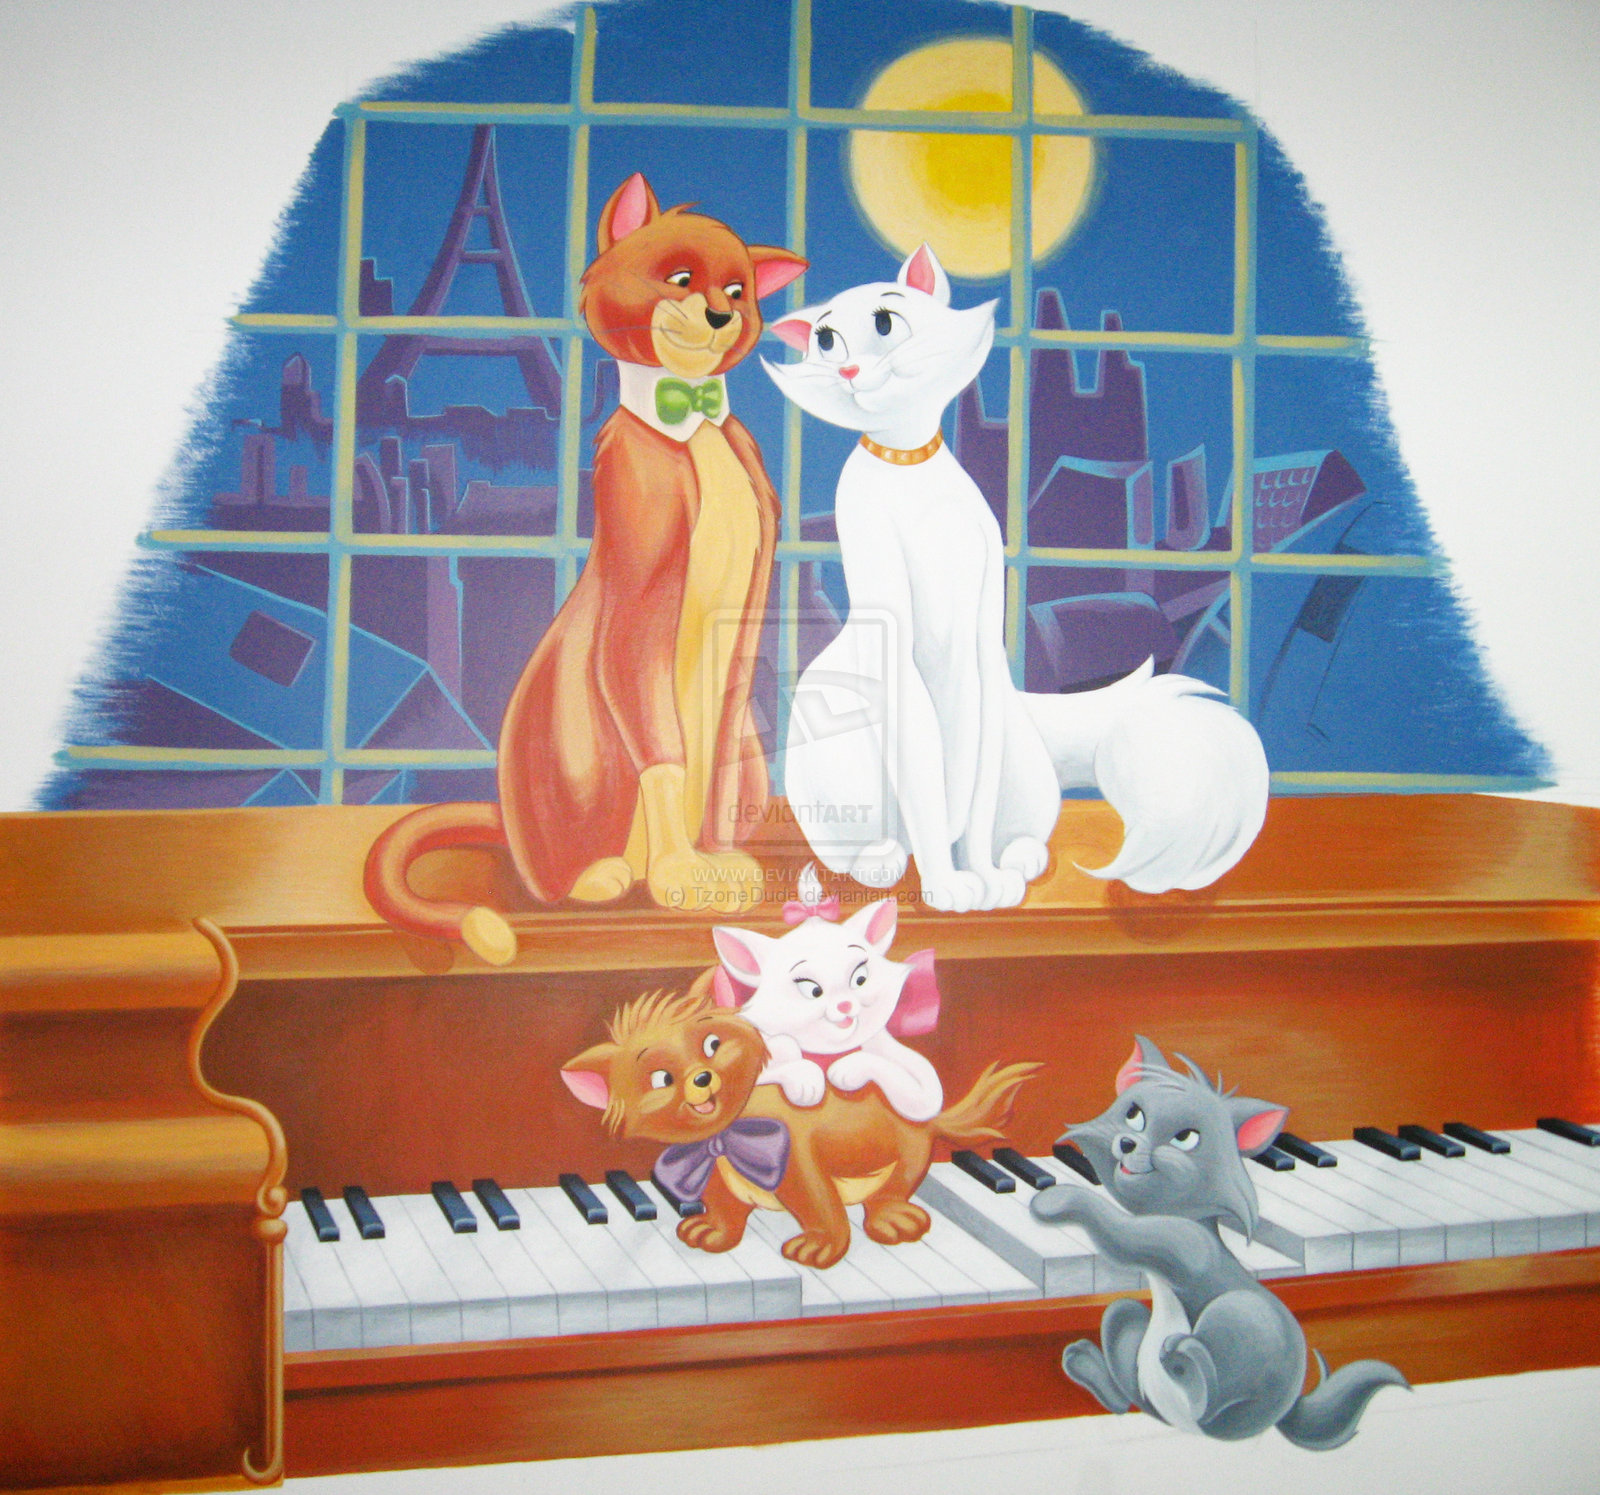 The Aristocats By Tzonedude